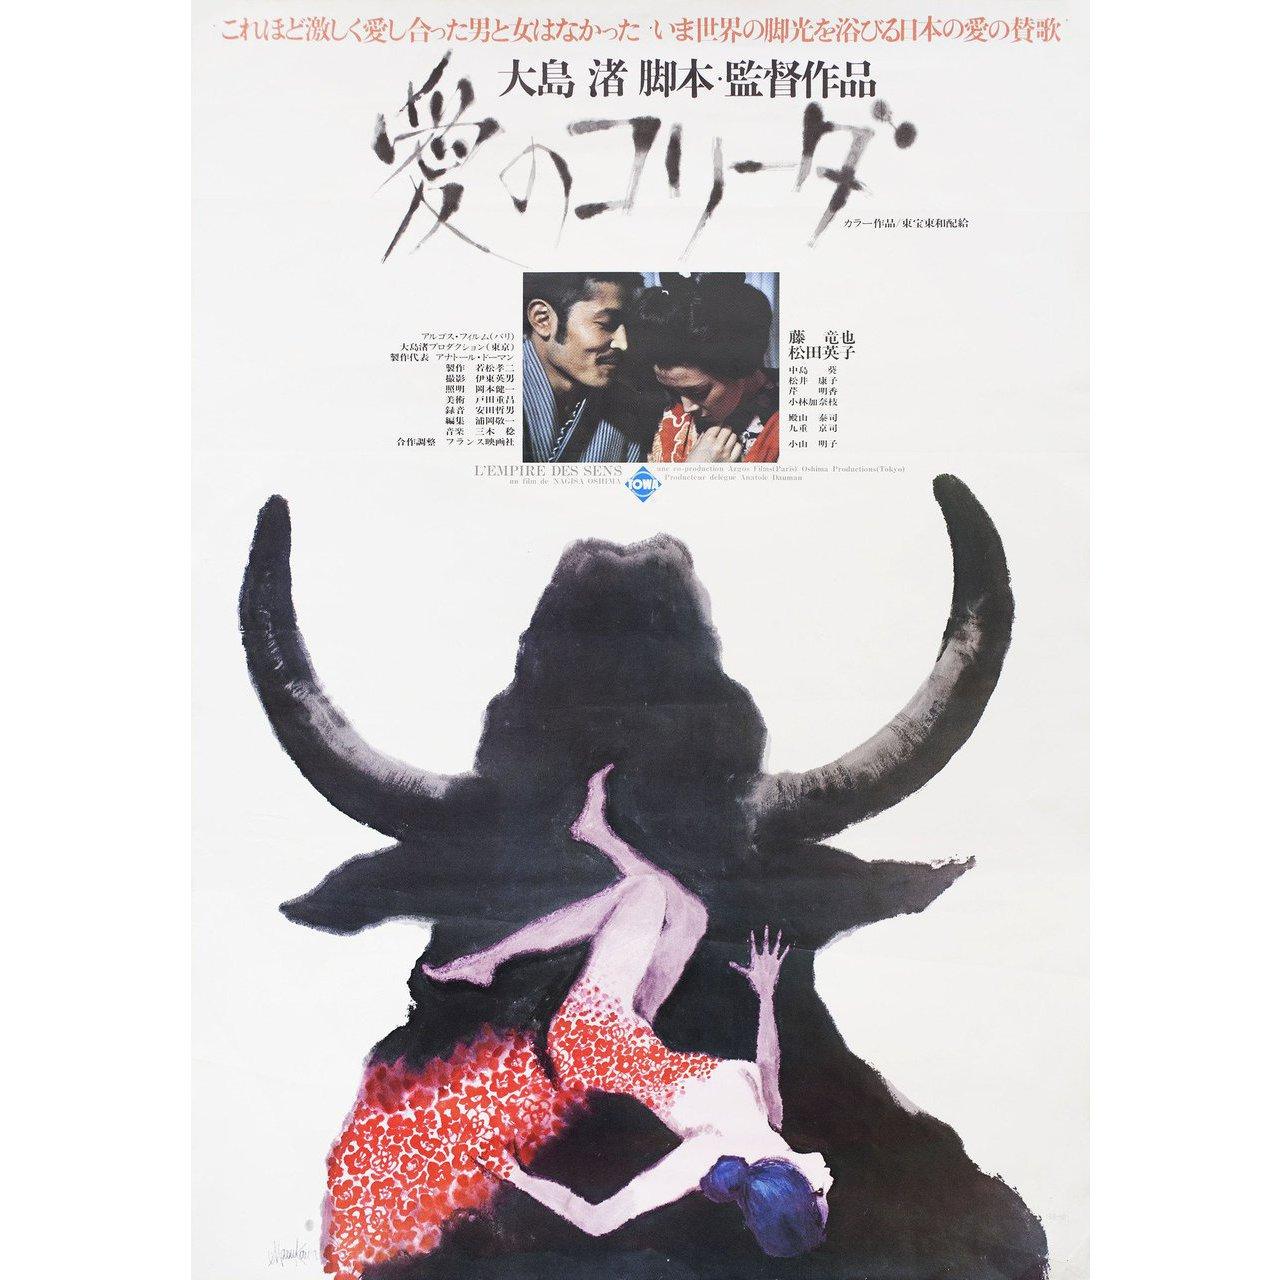 Original 1976 Japanese B2 poster by Susumu Masukawa for the film In the Realm of the Senses directed by Nagisa Oshima with Tatsuya Fuji / Eiko Matsuda / Aoi Nakajima / Yasuko Matsui. Fine condition, rolled. Please note: the size is stated in inches